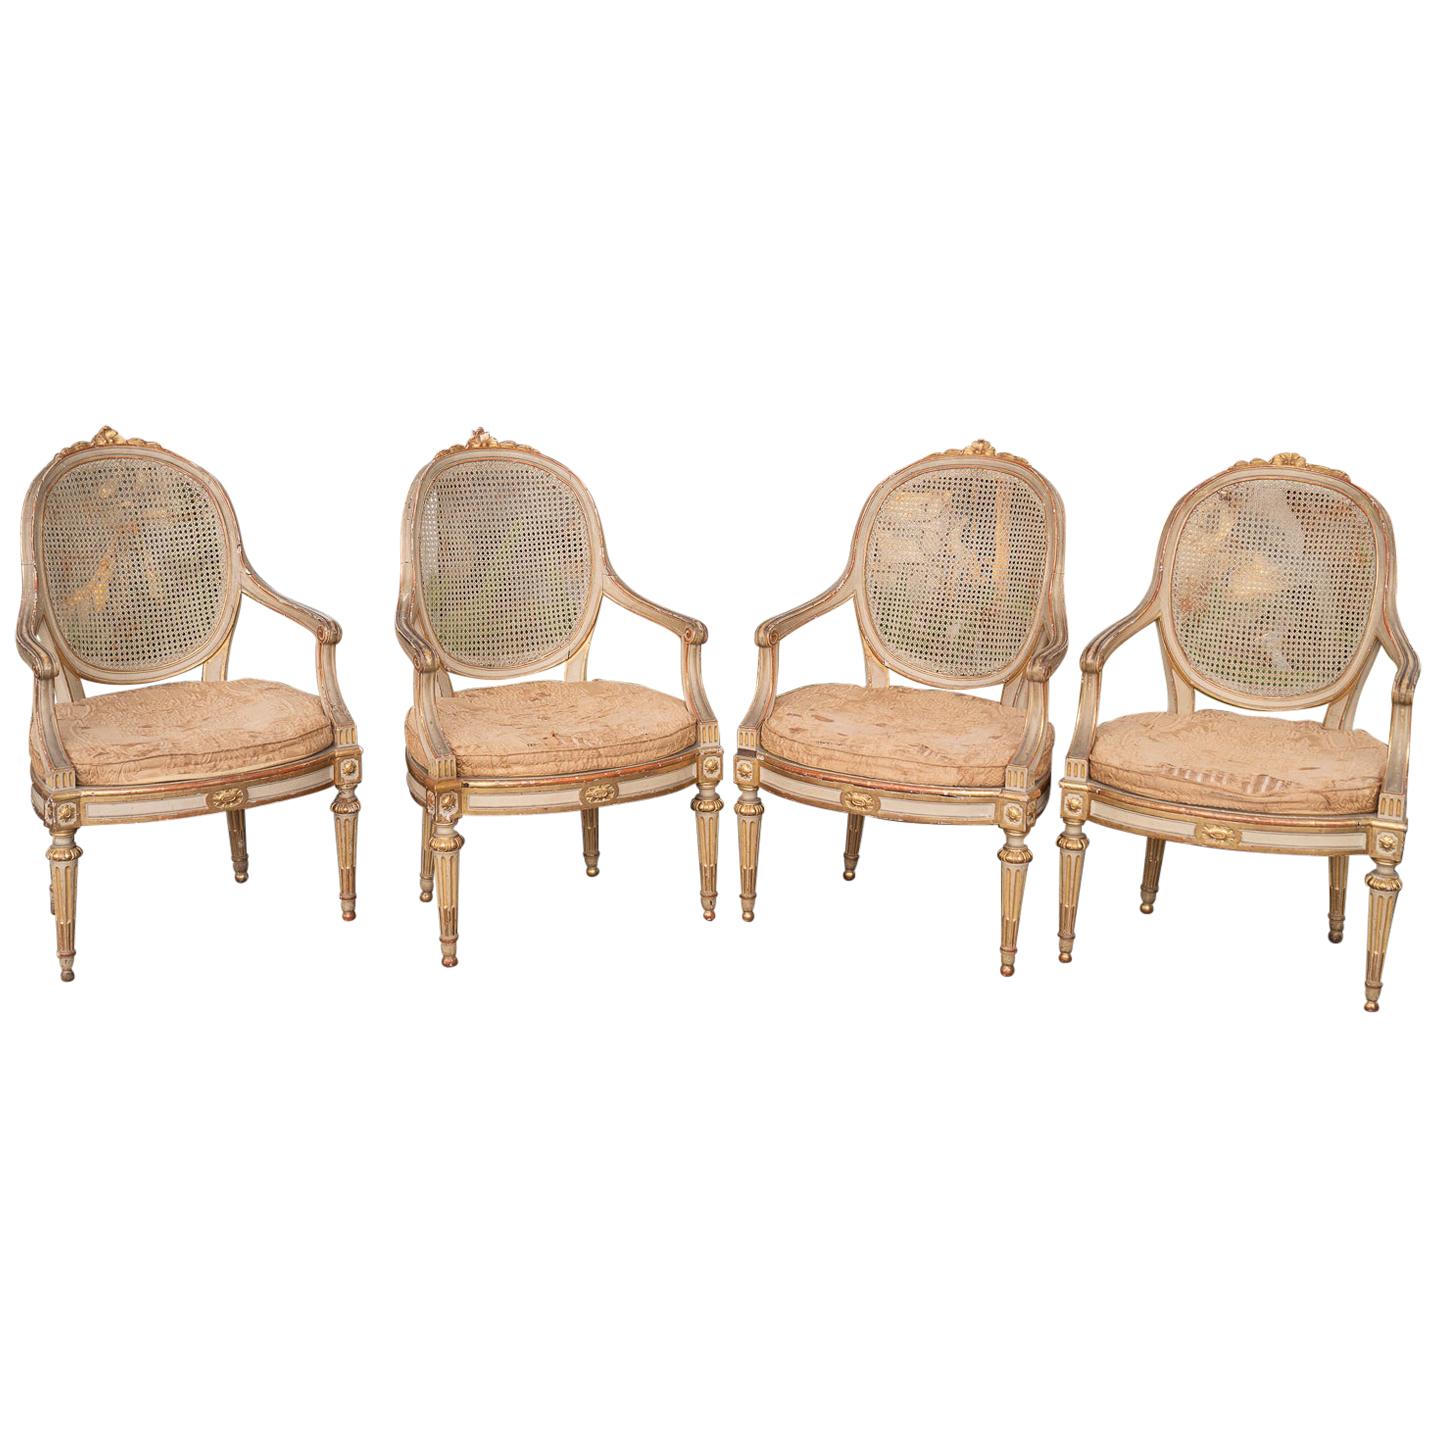 Two Pairs of 19th Century Gilded and Painted Armchairs 